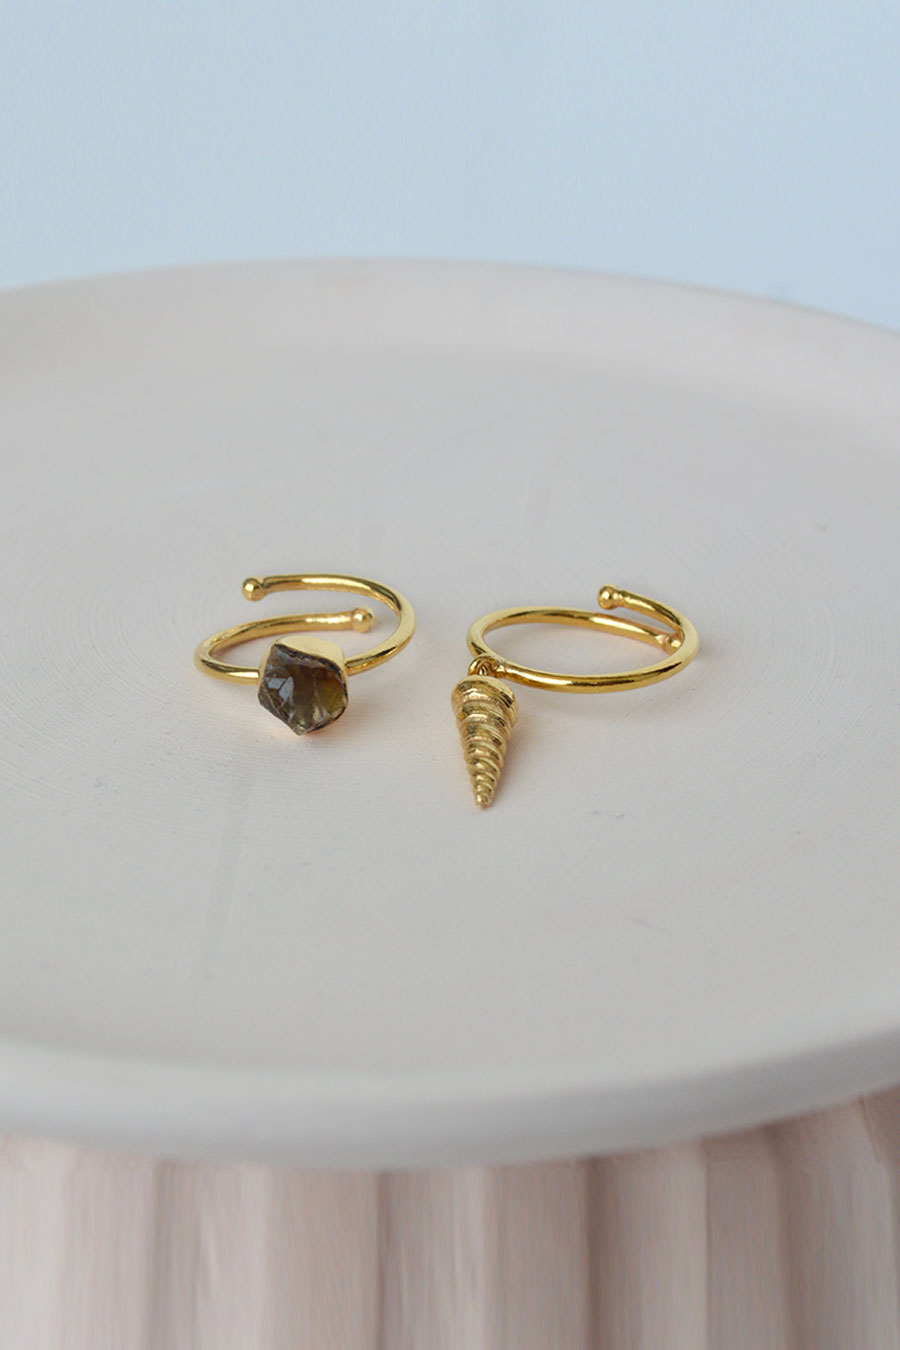 Pearl & Shell Adjustable Rings (Set of 2)